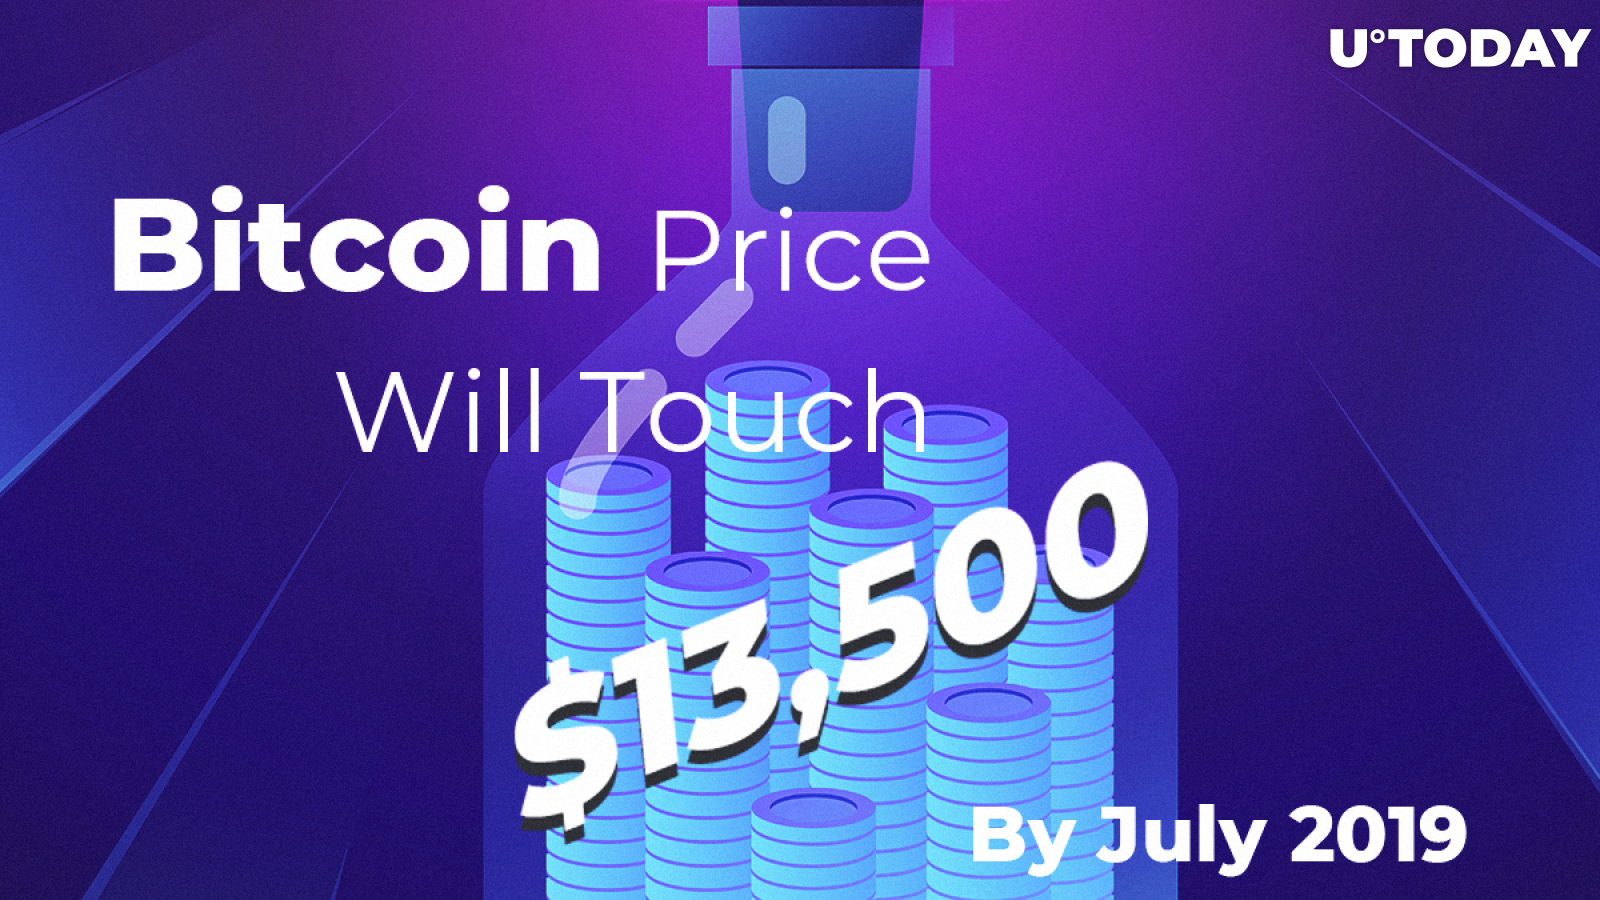 Bitcoin (BTC) Price Will Touch $13,500 By July 2019 – Main Reasons For Skyrocketing